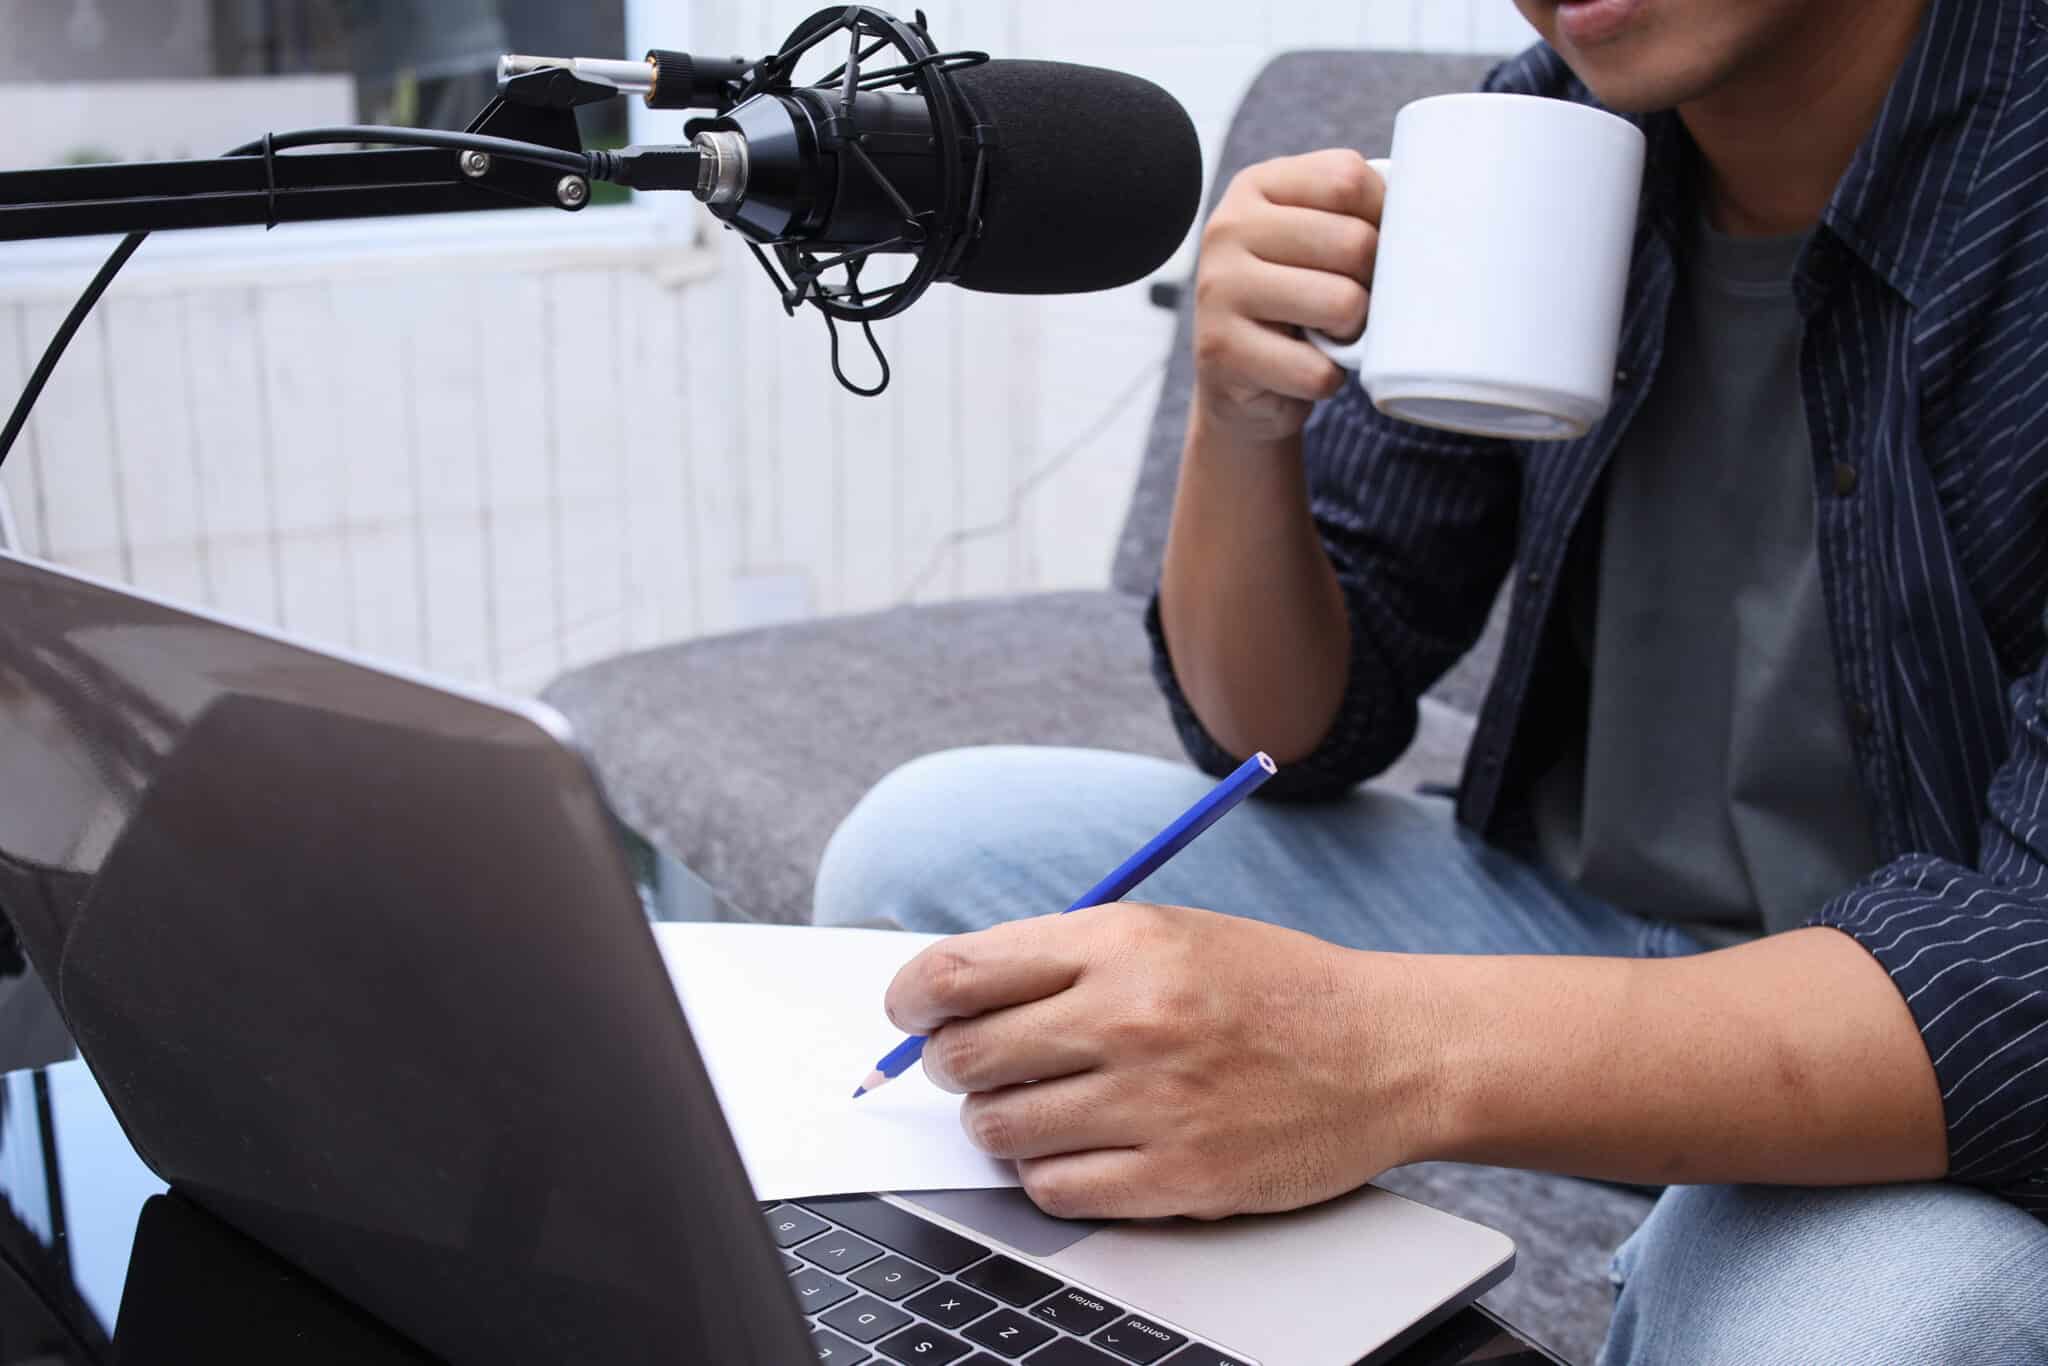 Podcaster prepares content for transcription services, recording with professional gear.